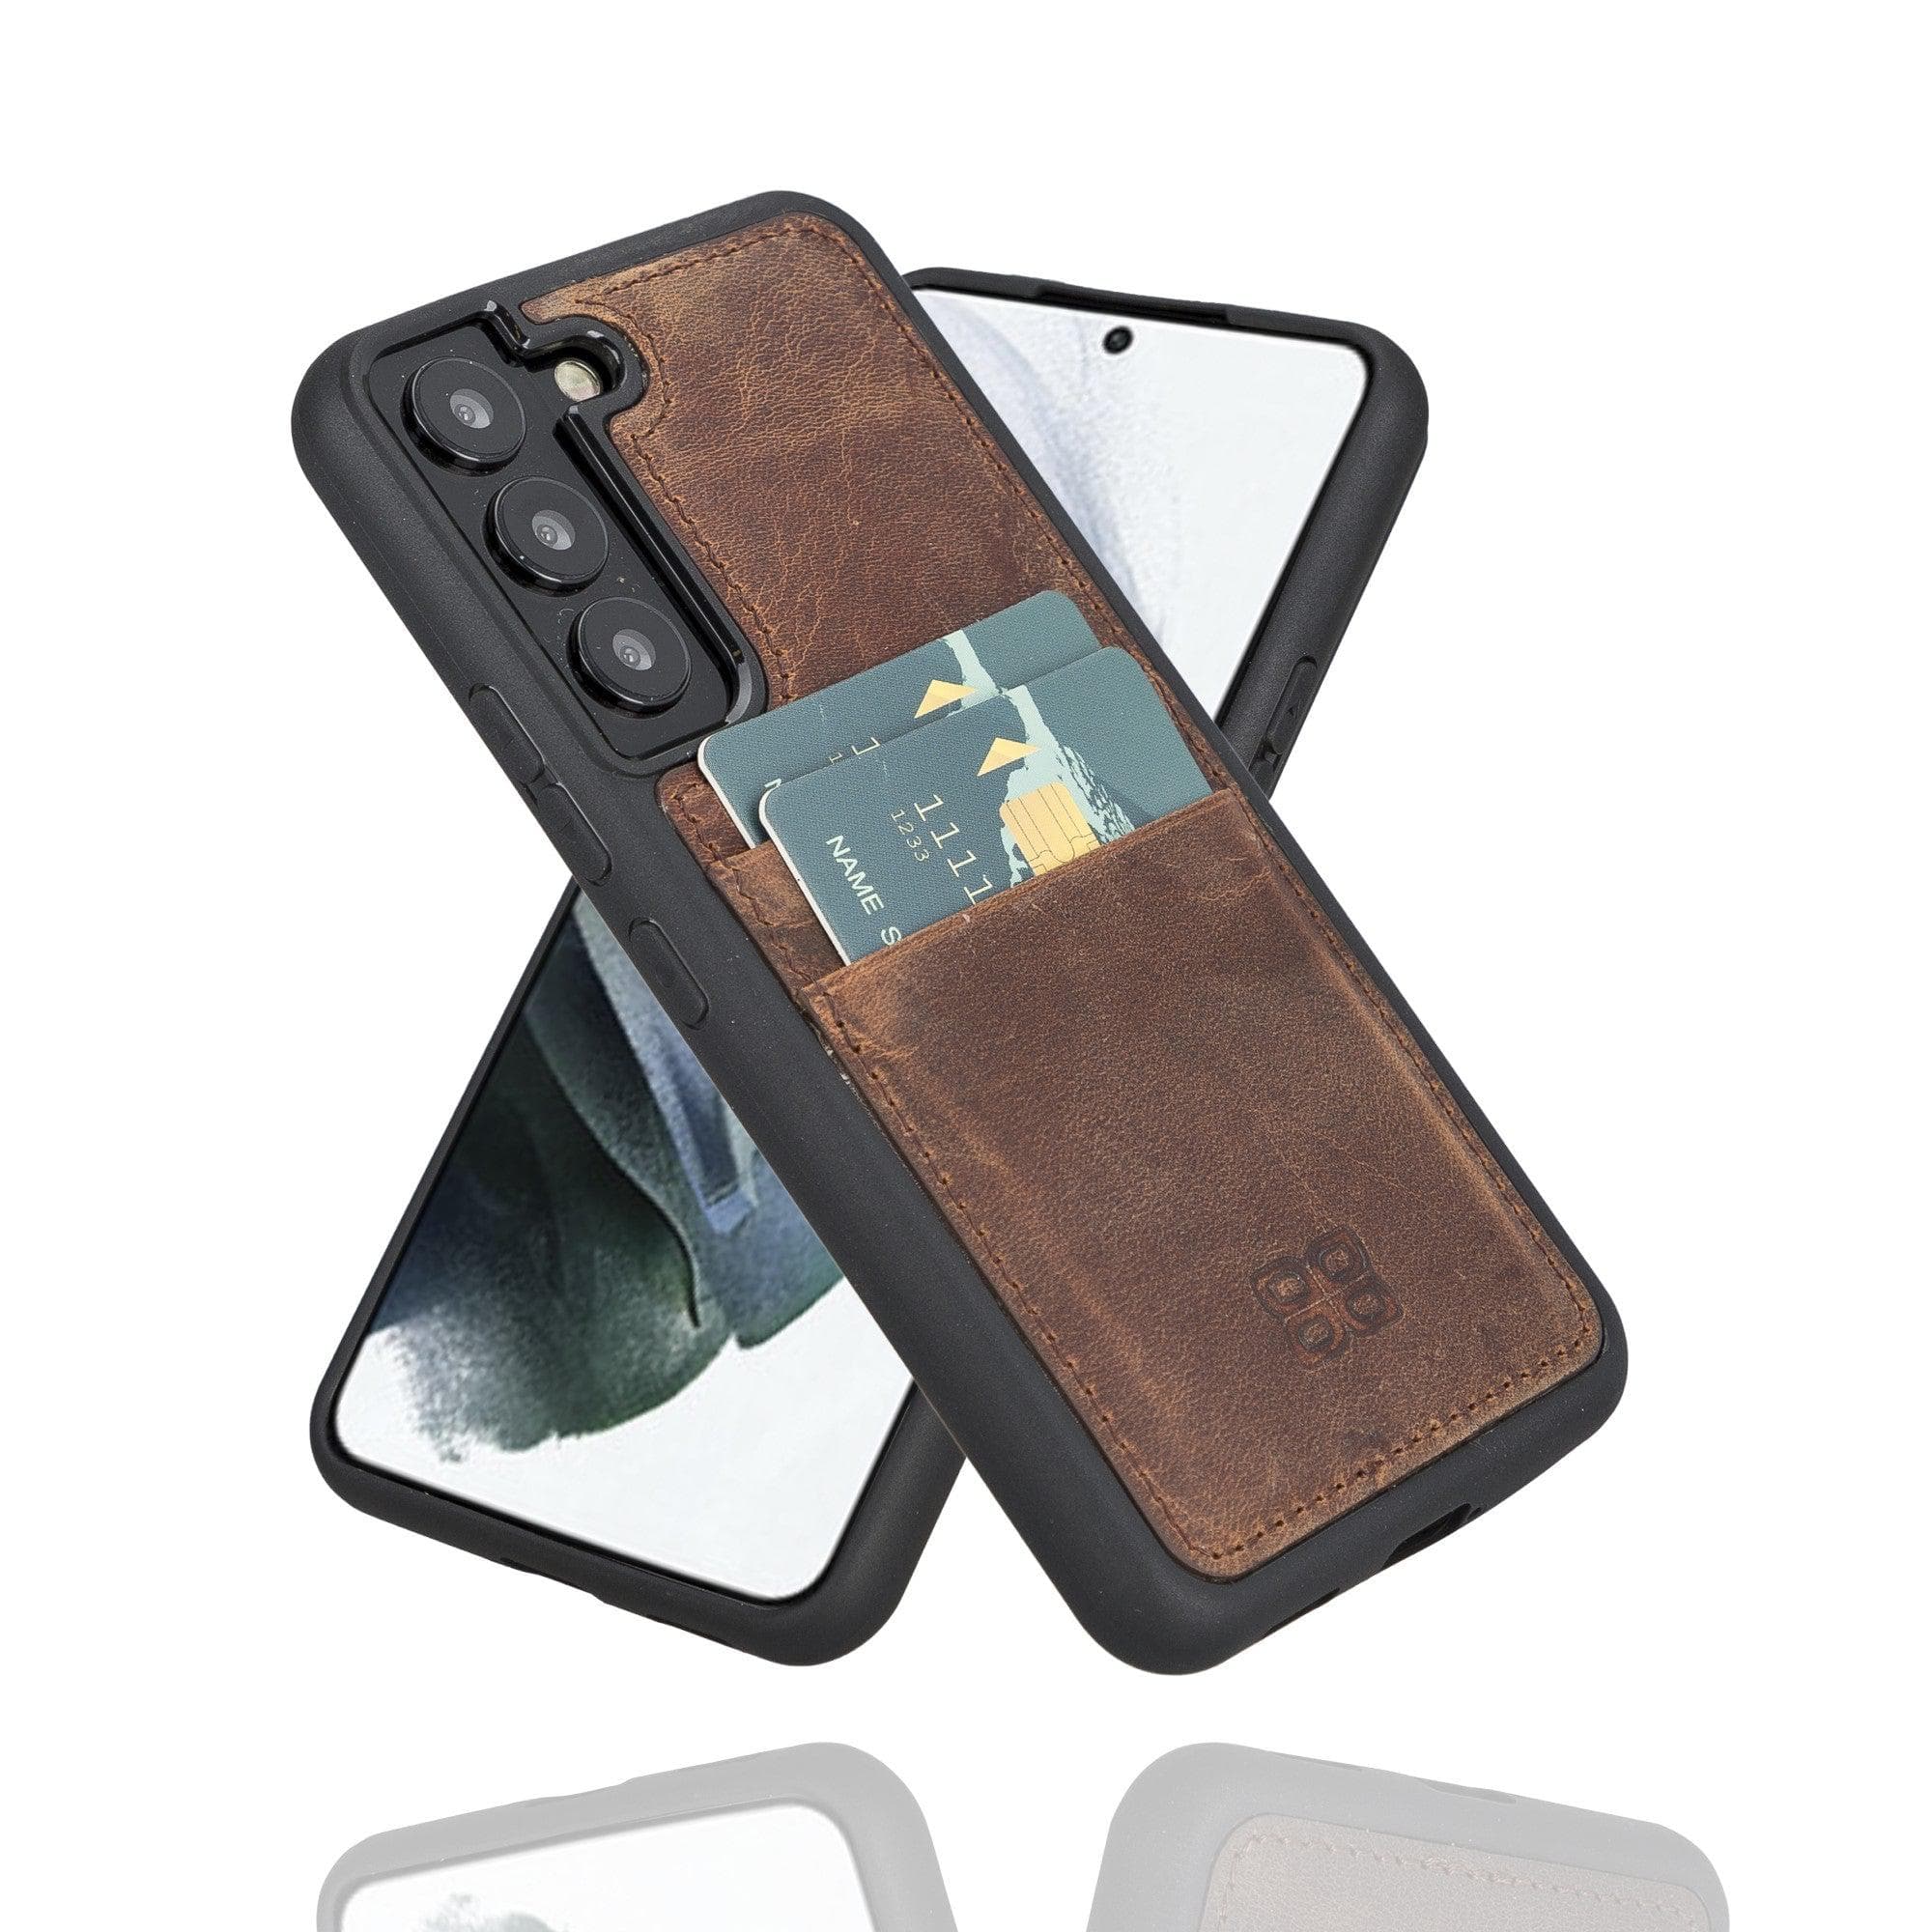 Samsung Galaxy S22 Series Genuine Leather Slim Back Cover Case with Card Holders Samsung Galaxy S22 Plus / Antic Brown Bouletta